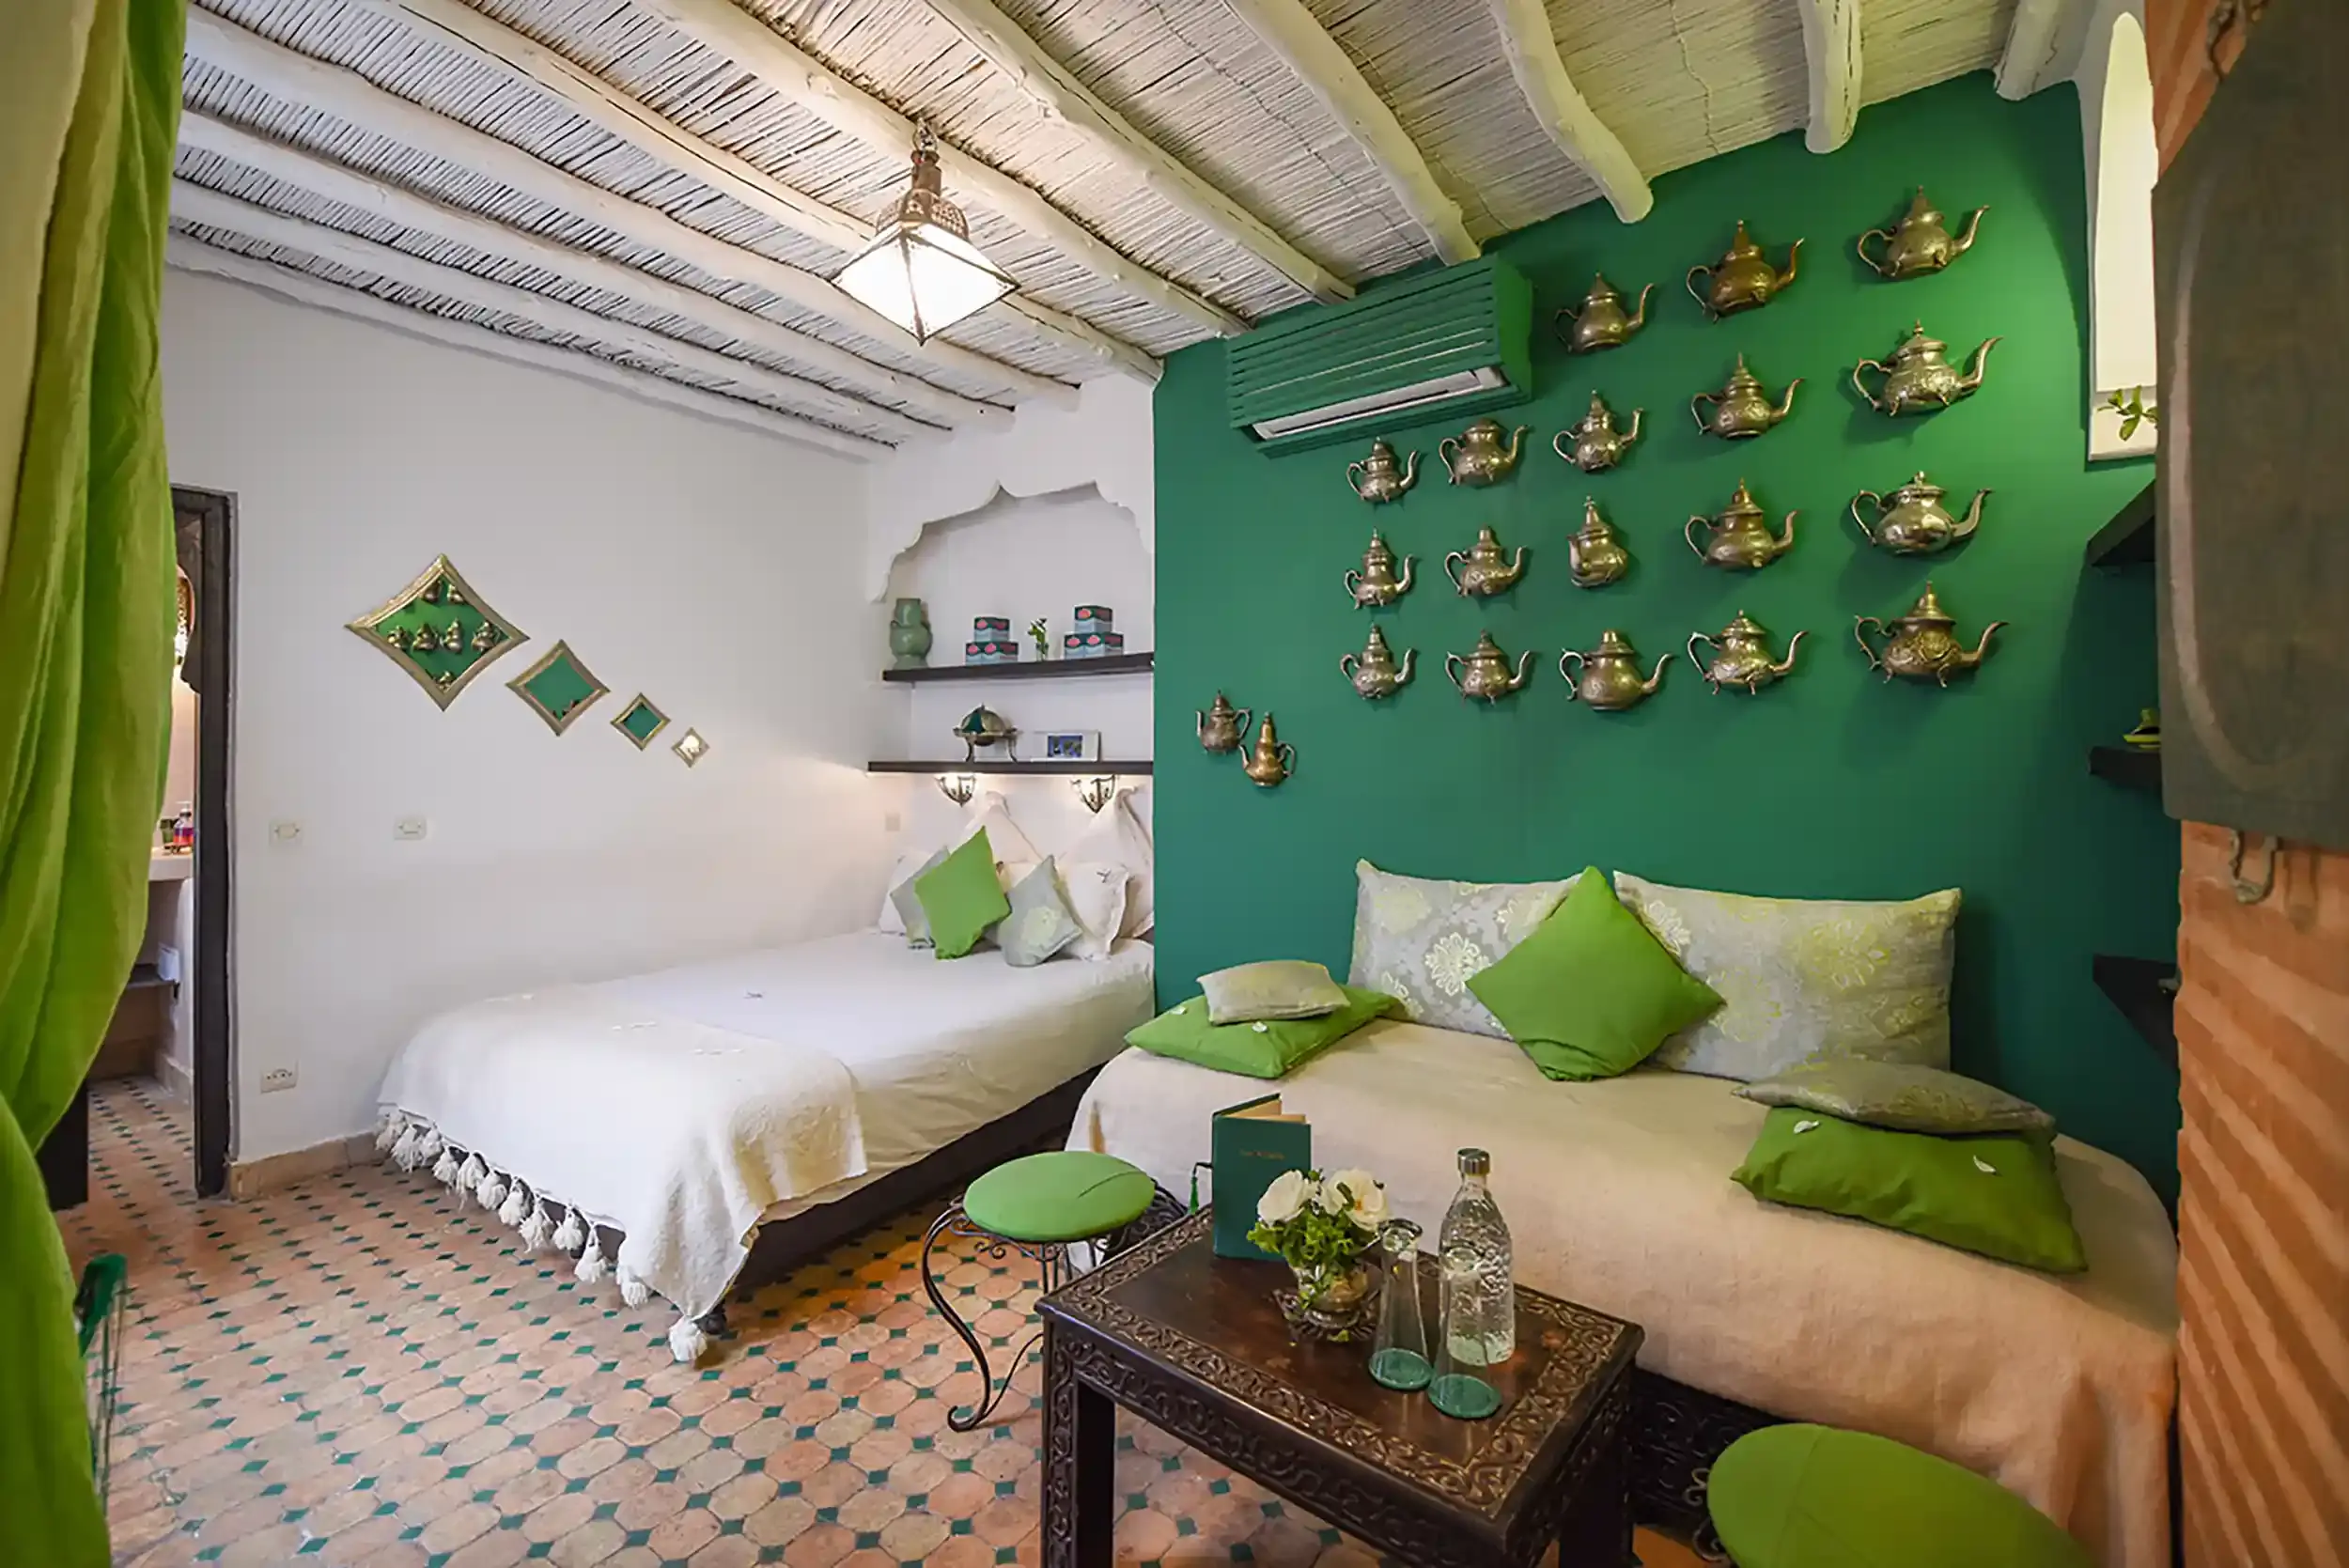 A room in our guesthouse, Riad Houdou. The room in the photo is our Superior Junior Suite.